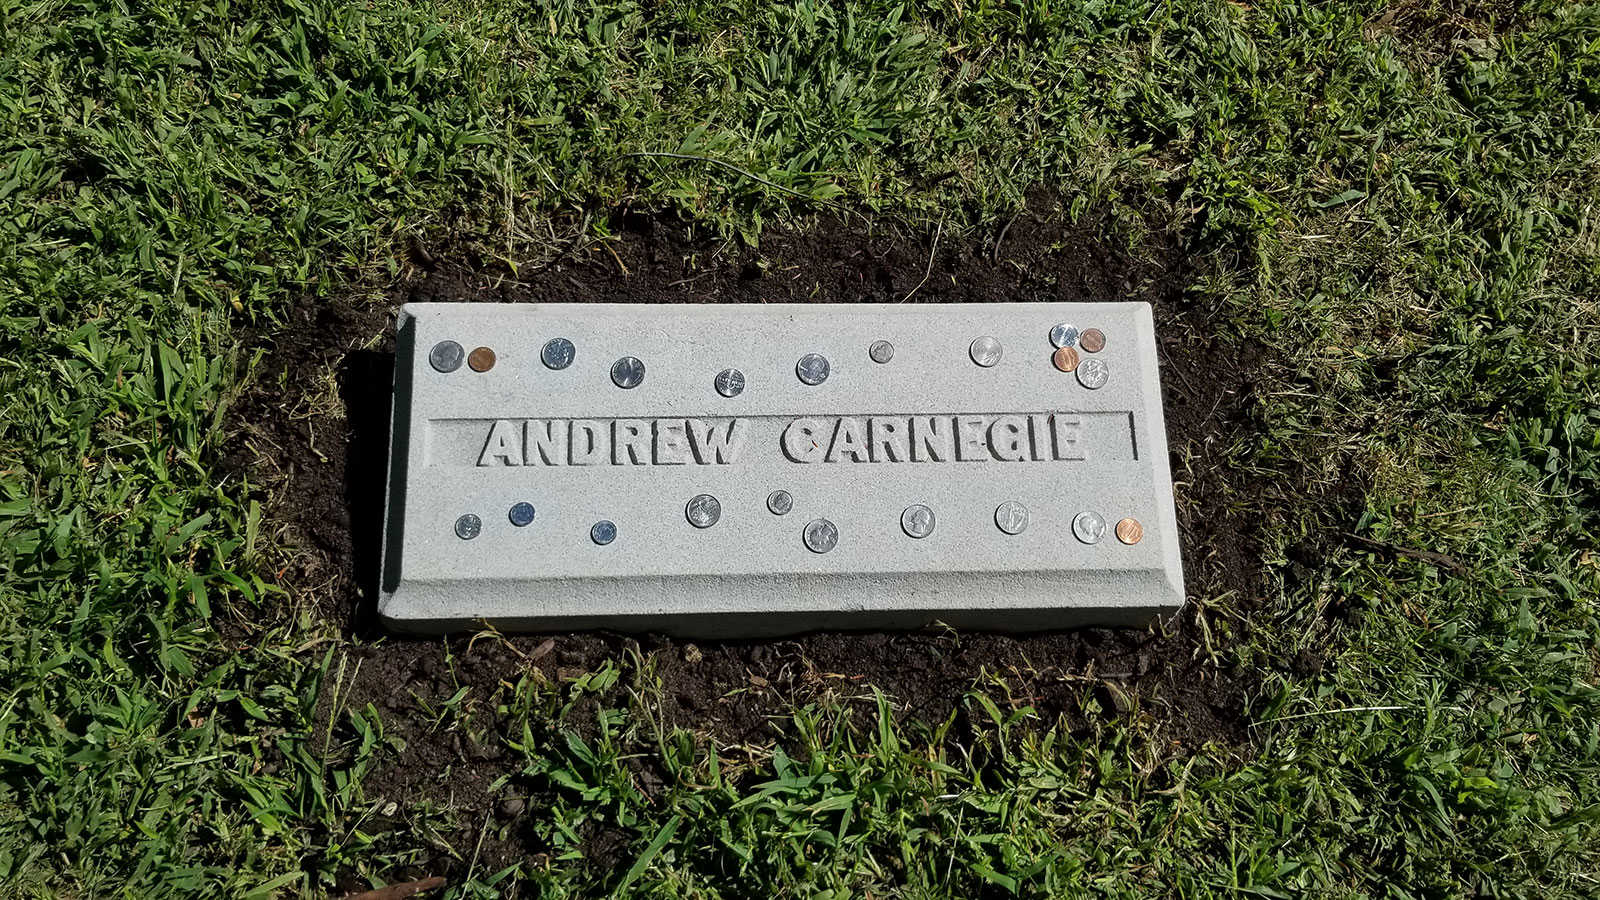 Visitor’s to Carnegie’s grave often leave a coin for good fortune while paying respect to the industrialist-turned-philanthropists at his burial site in Sleepy Hollow, New York.